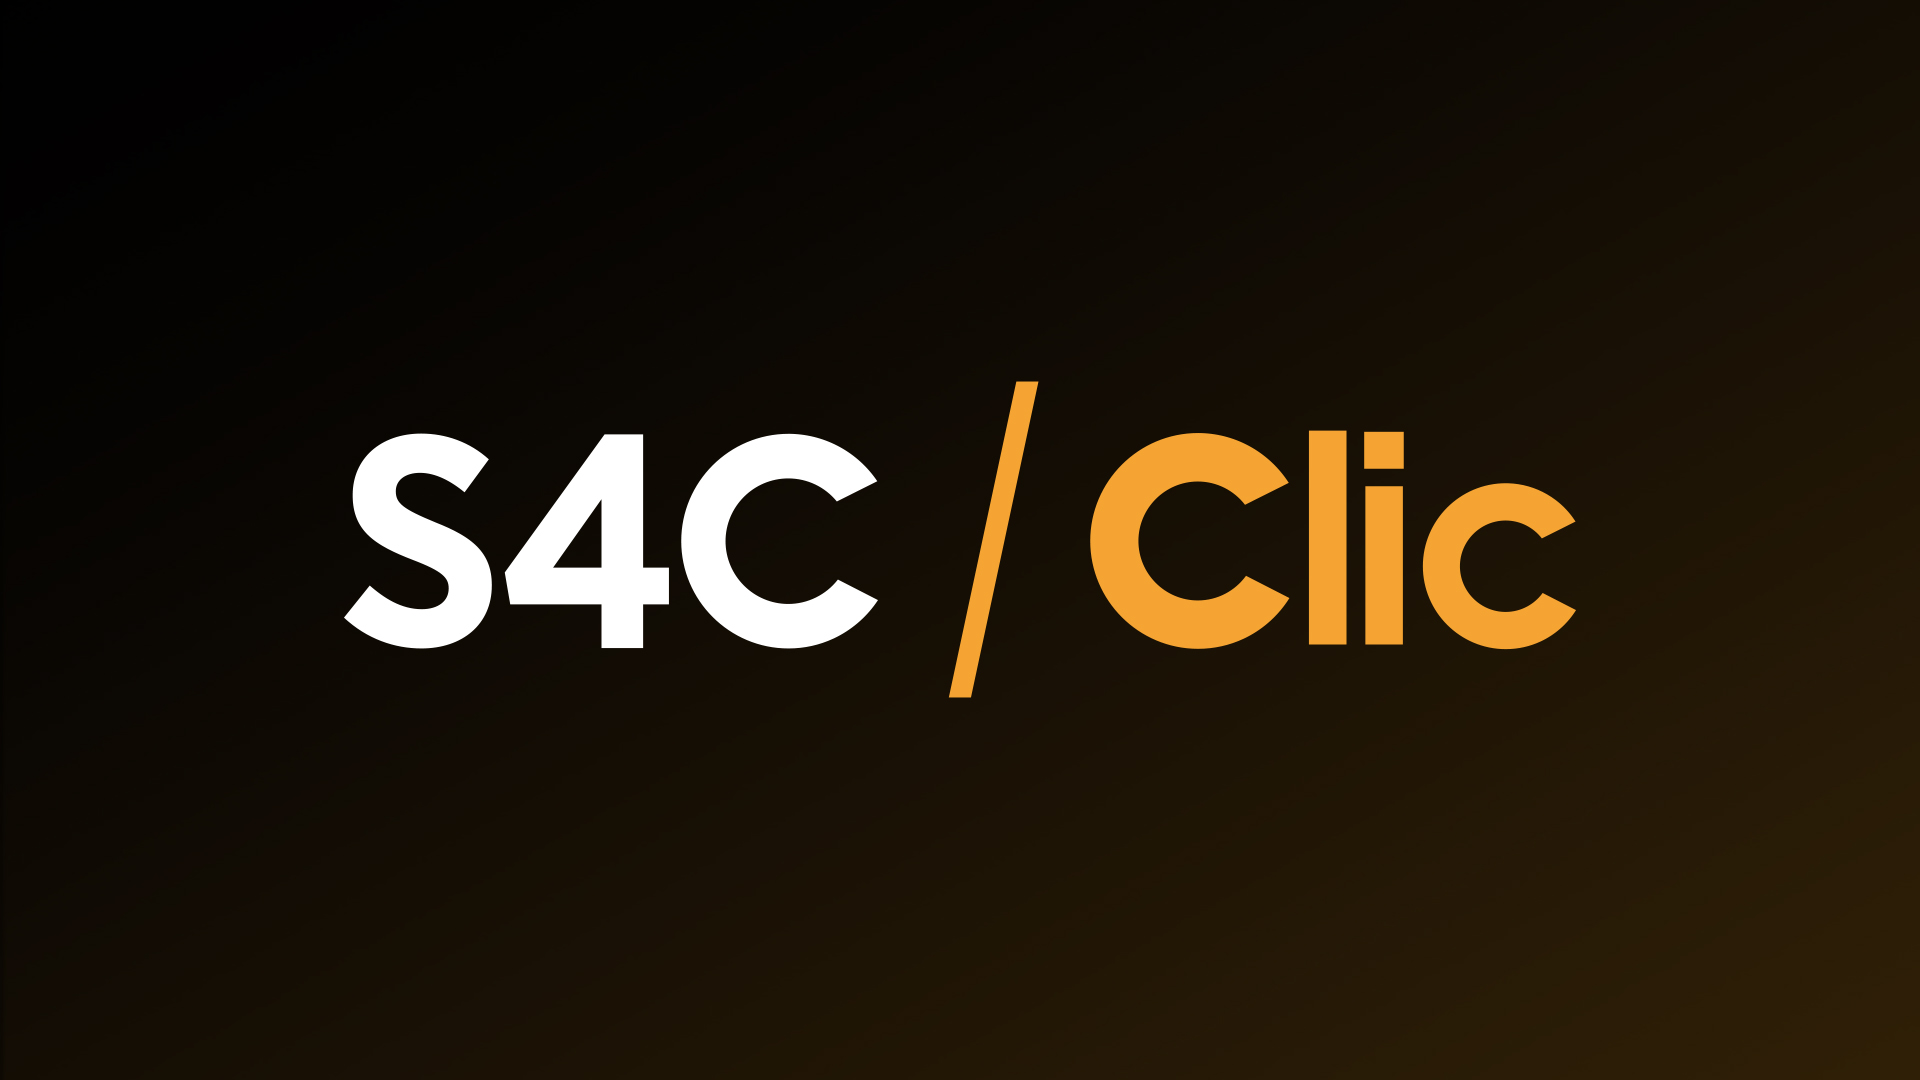 You can enjoy S4C content live and on demand on S4C Clic when you register for free